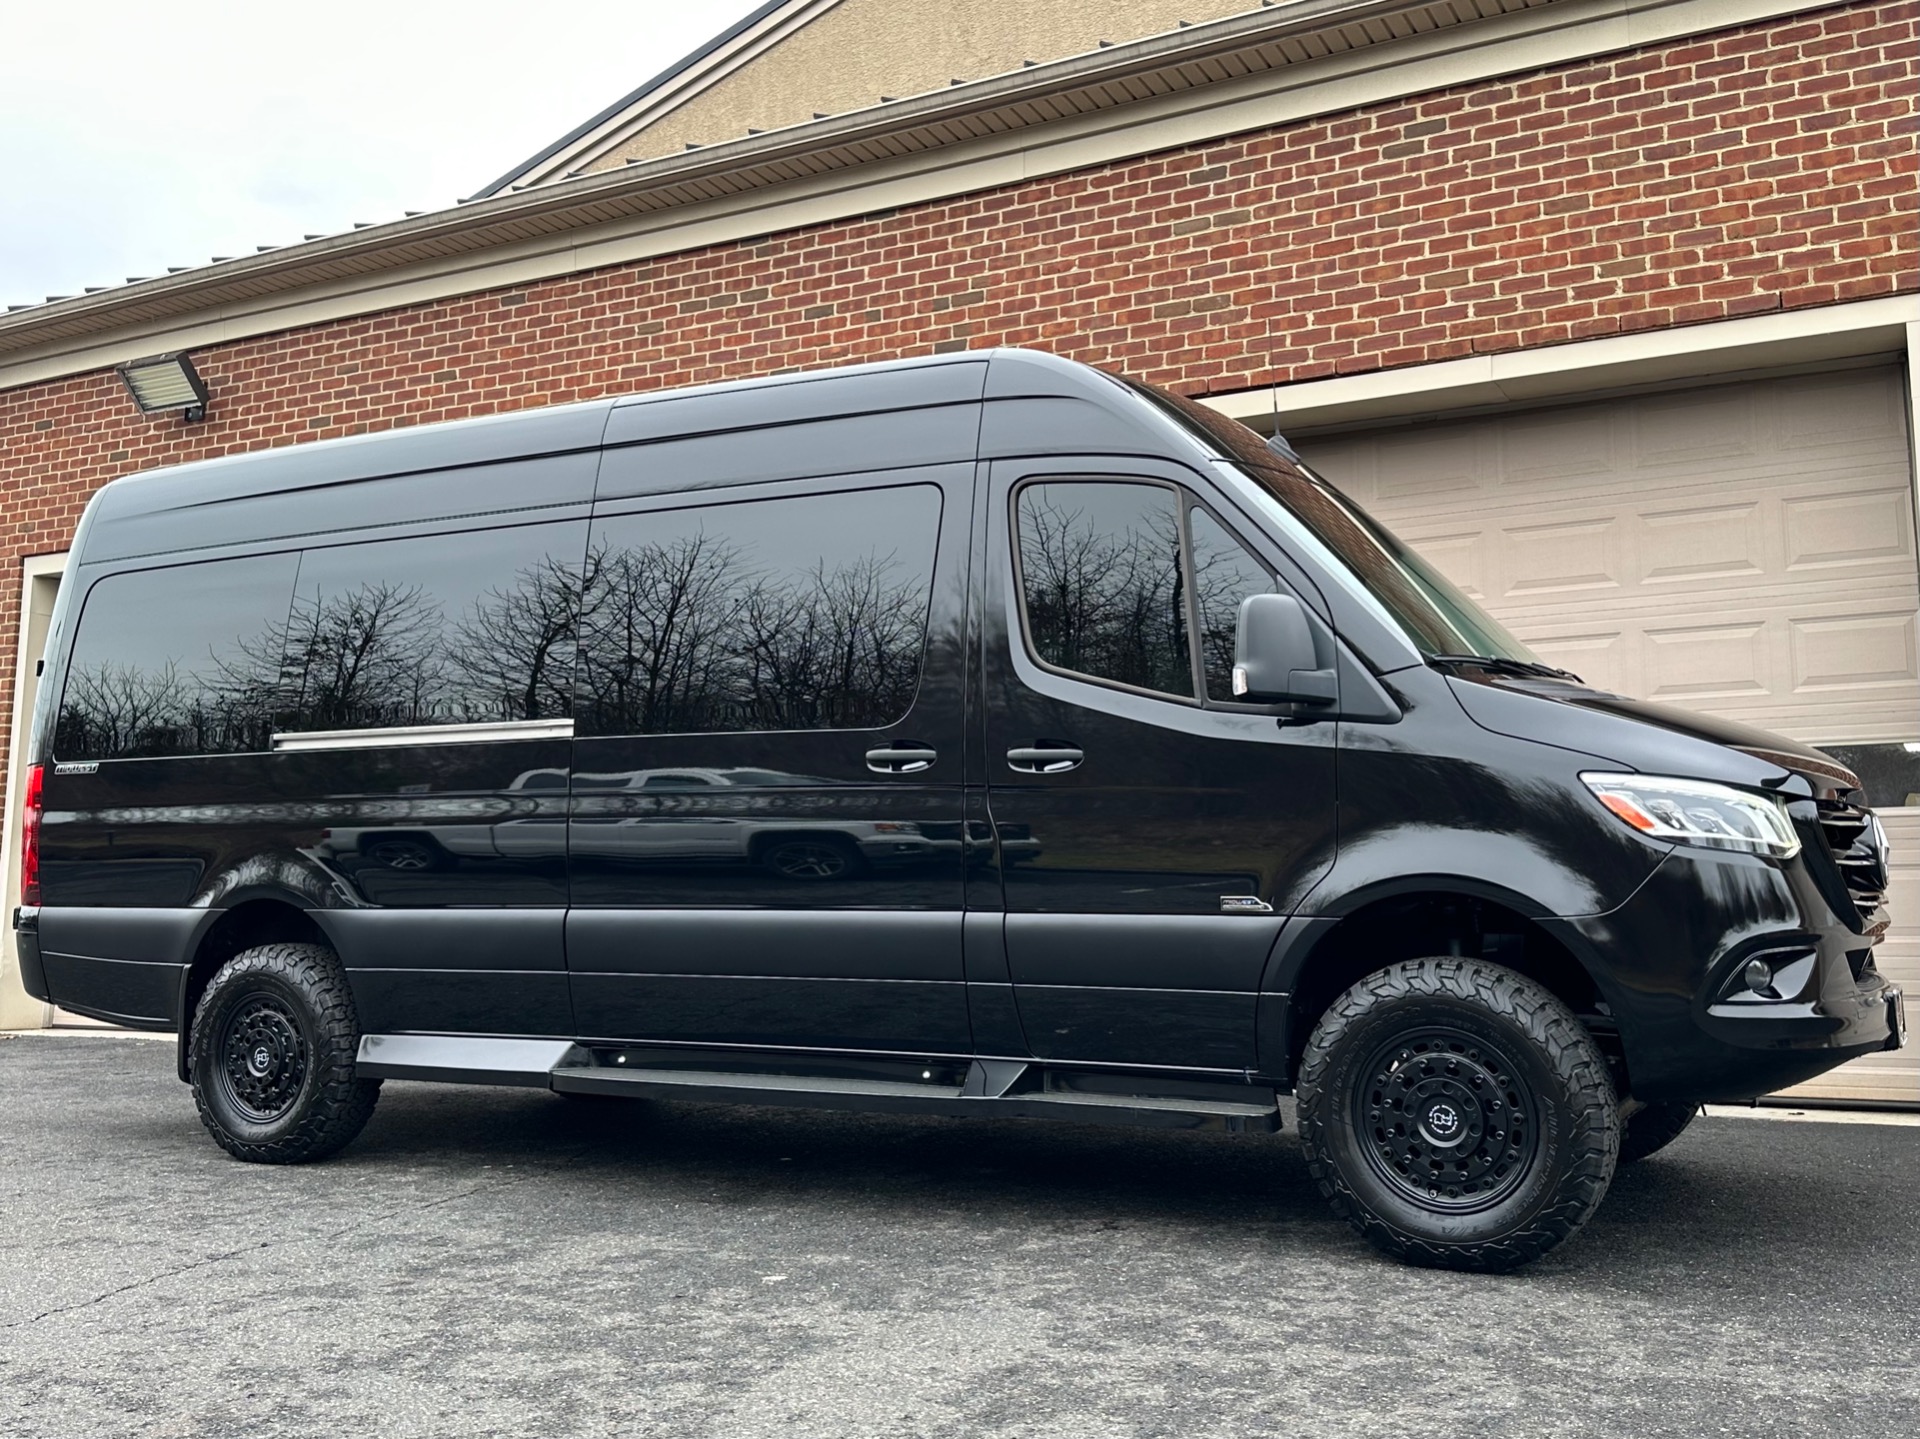 Used-2021-Mercedes-Benz-Sprinter-AWD-2500-High-Top-Conversion